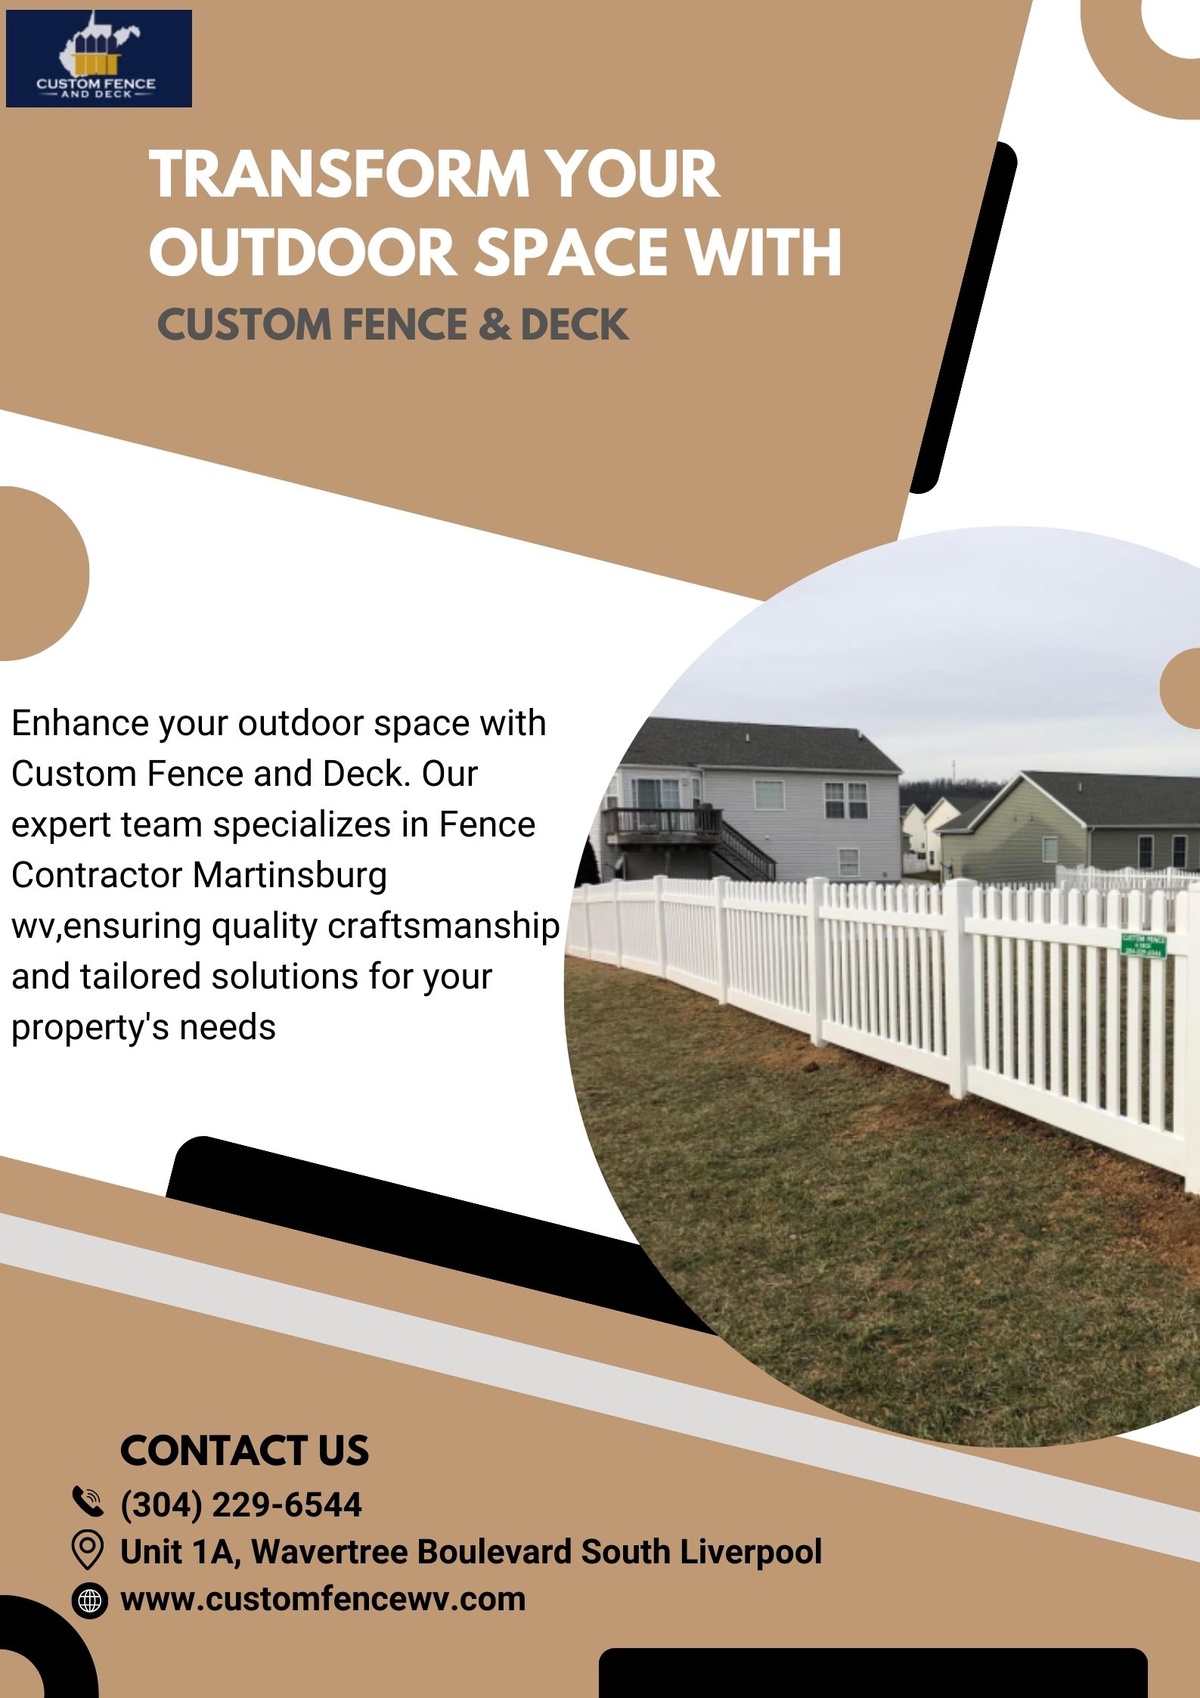 Martinsburg's Premier Fence Installation: Custom Fence and Deck